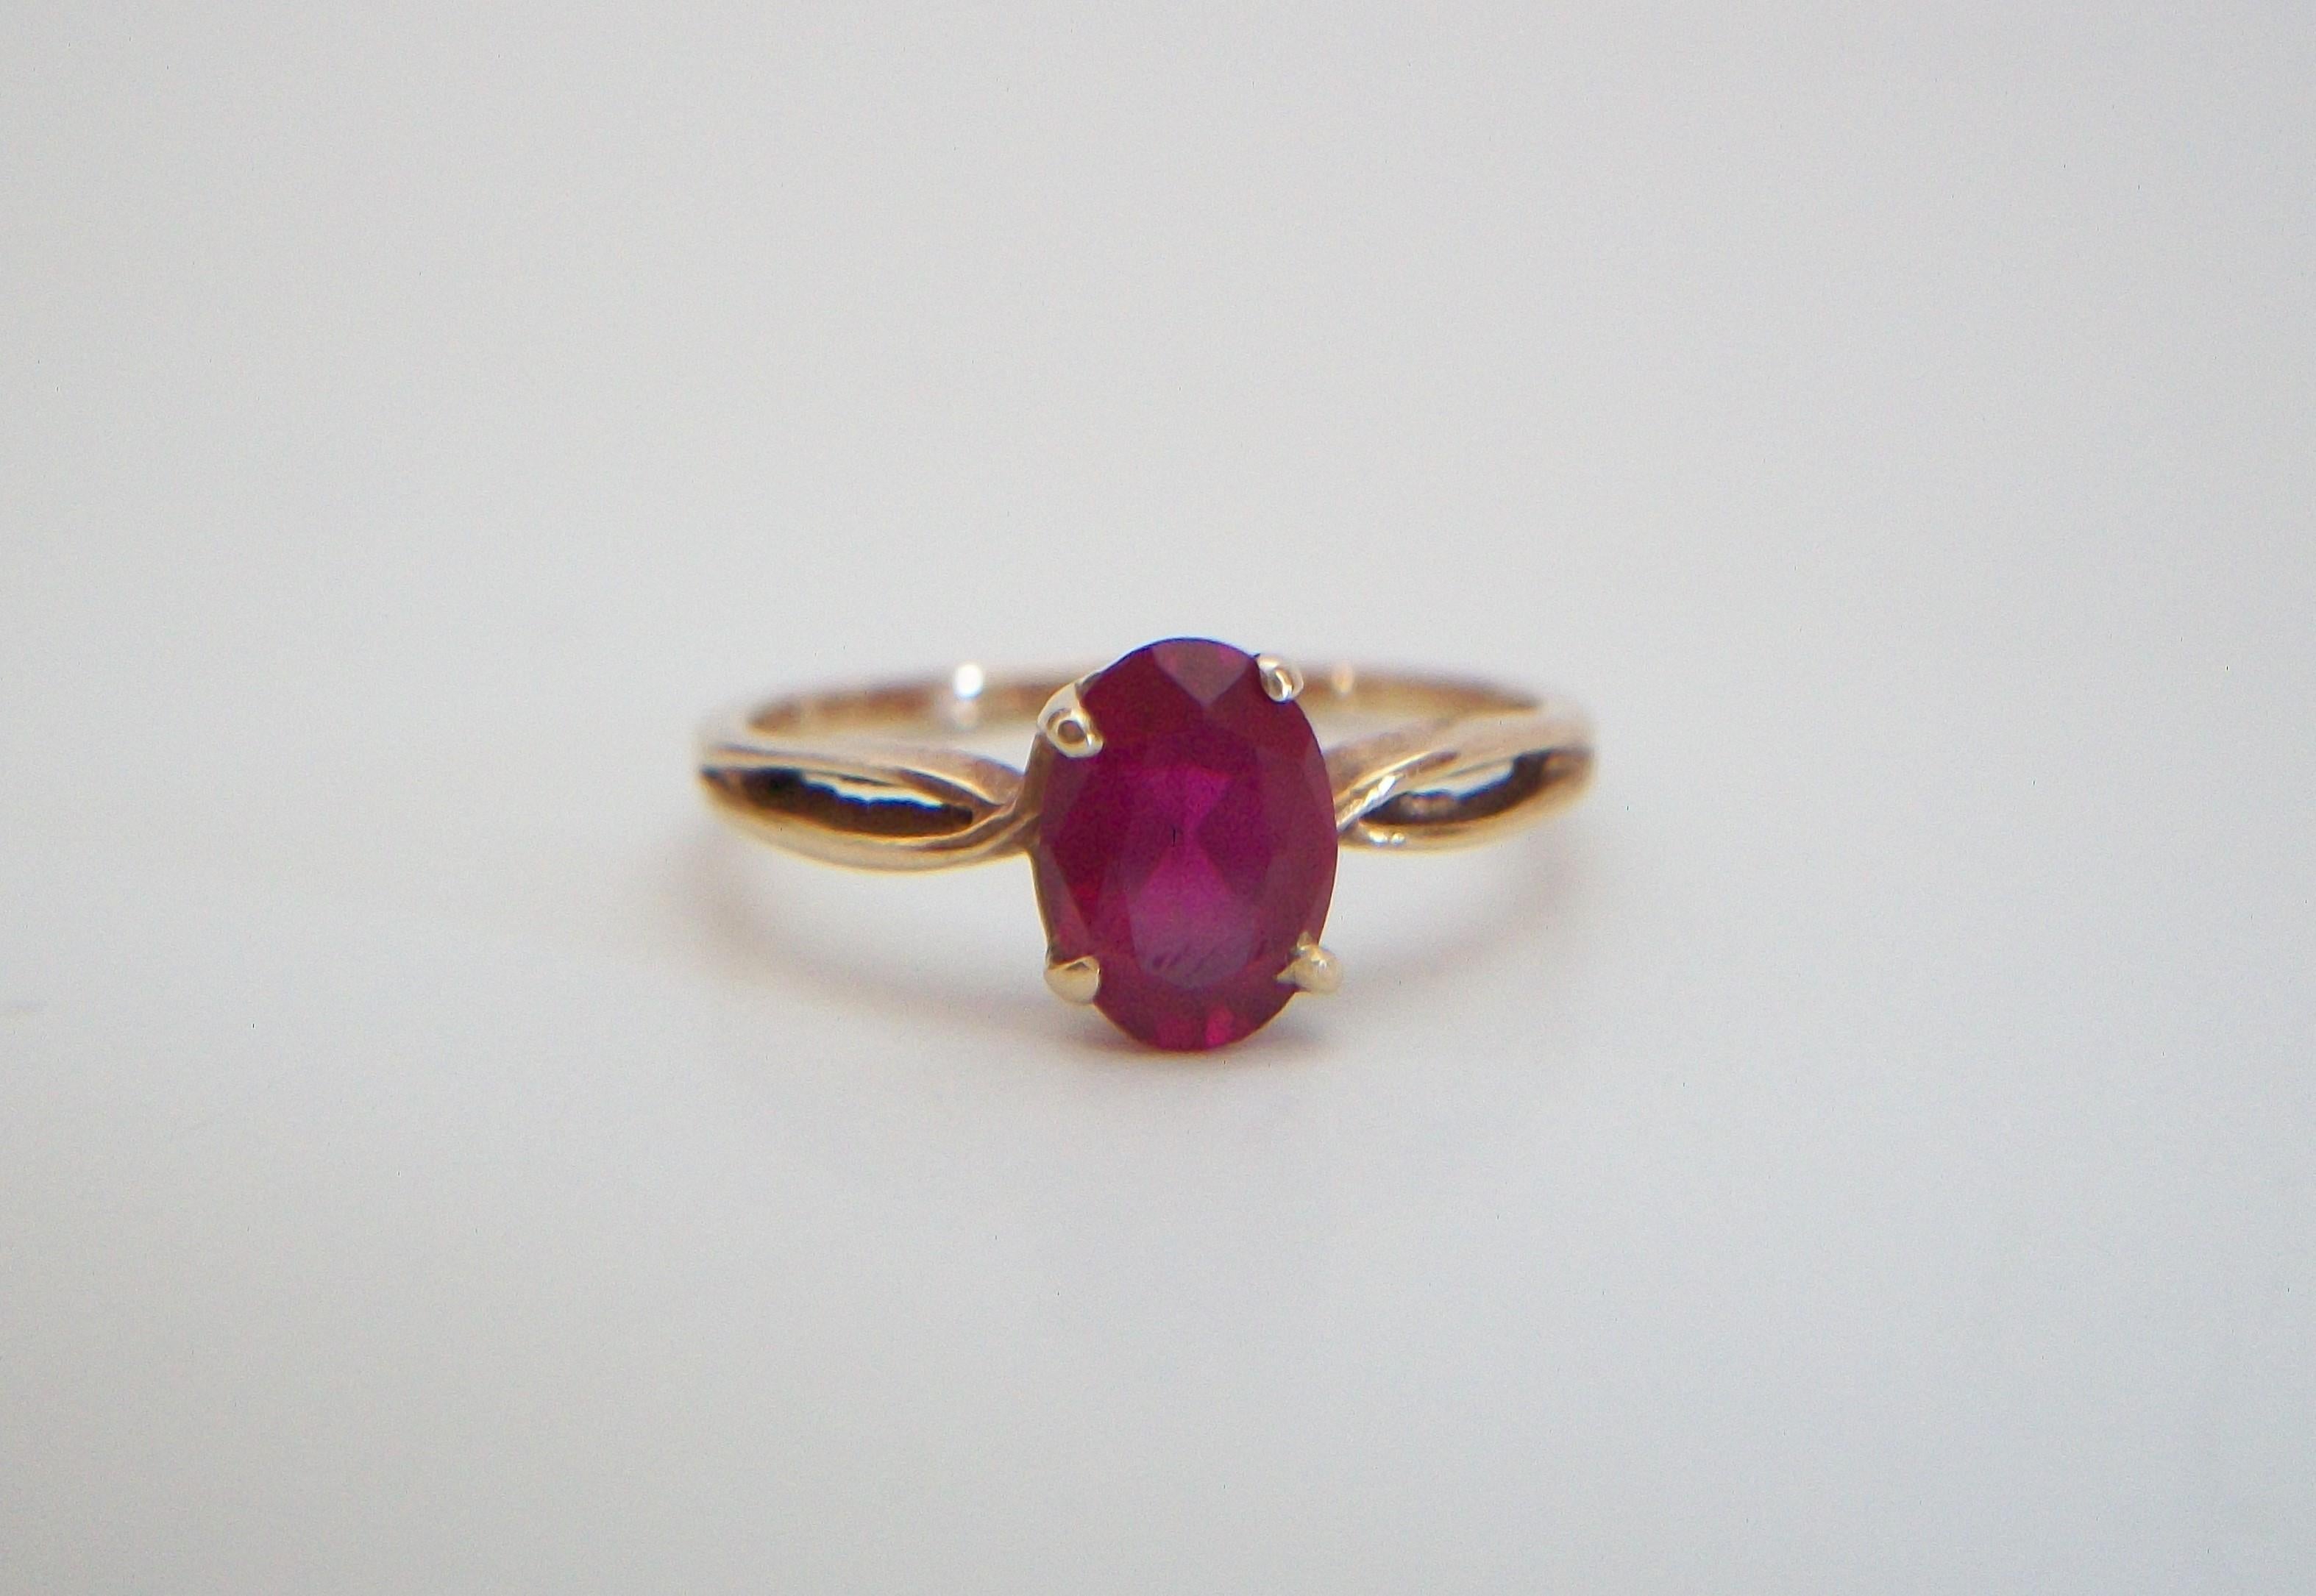 Romantic Vintage Red Topaz & 10K Yellow Gold Ring - Size 5.5 - U.S.A. - Circa 1980's For Sale